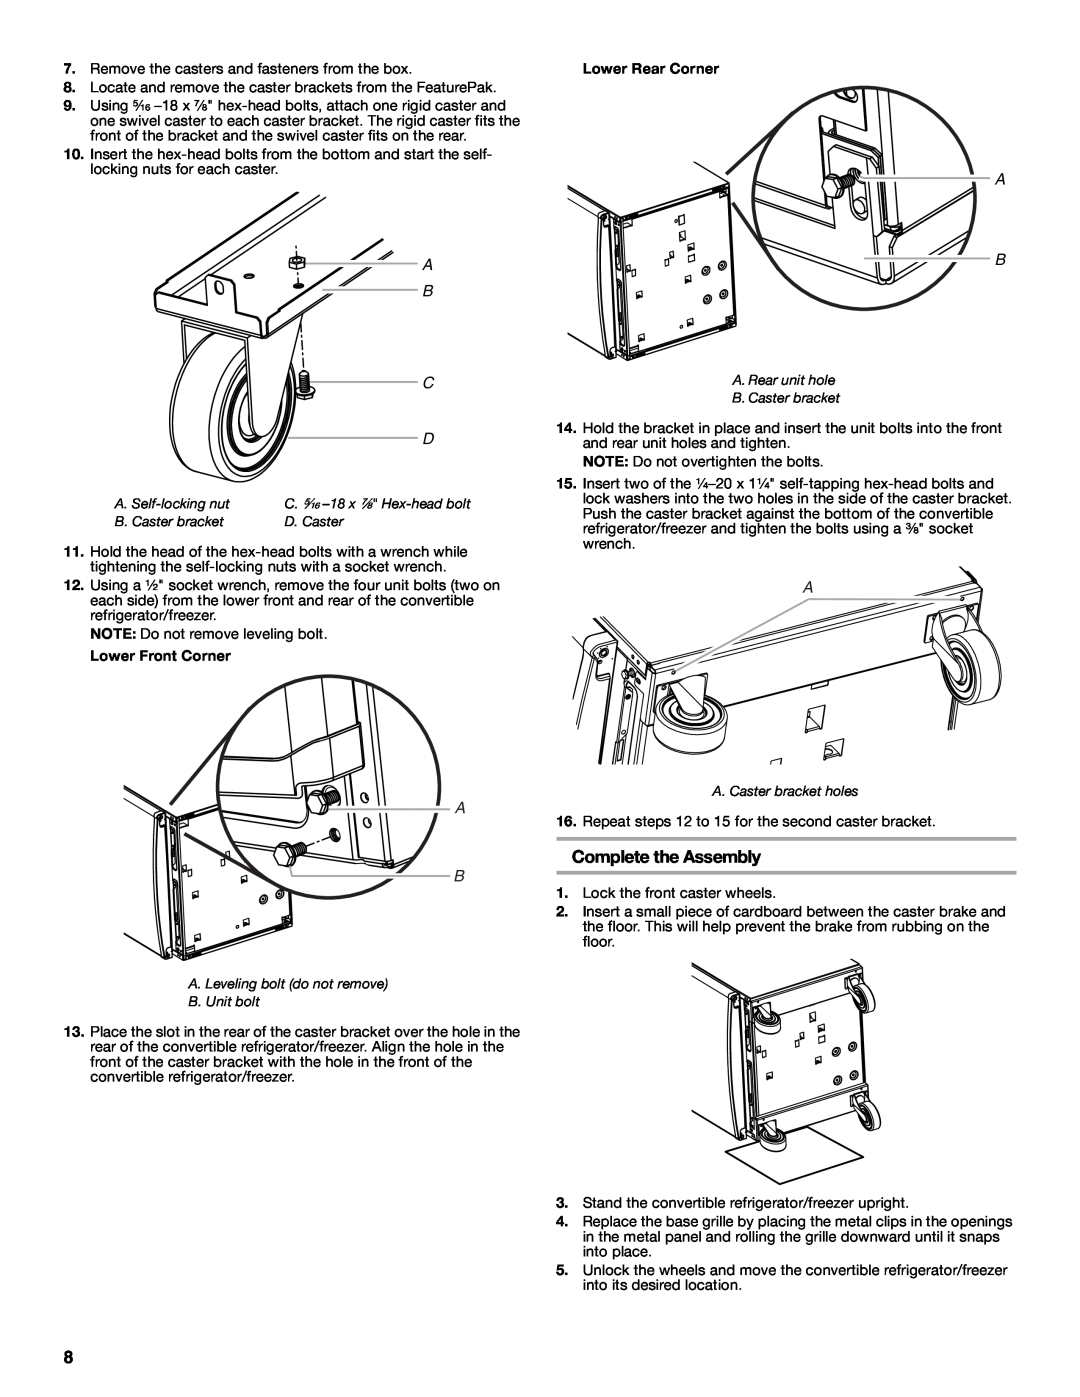 Whirlpool 2314466 manual Complete the Assembly, A. Self-locking nut, B. Caster bracket, D. Caster, A. Caster bracket holes 